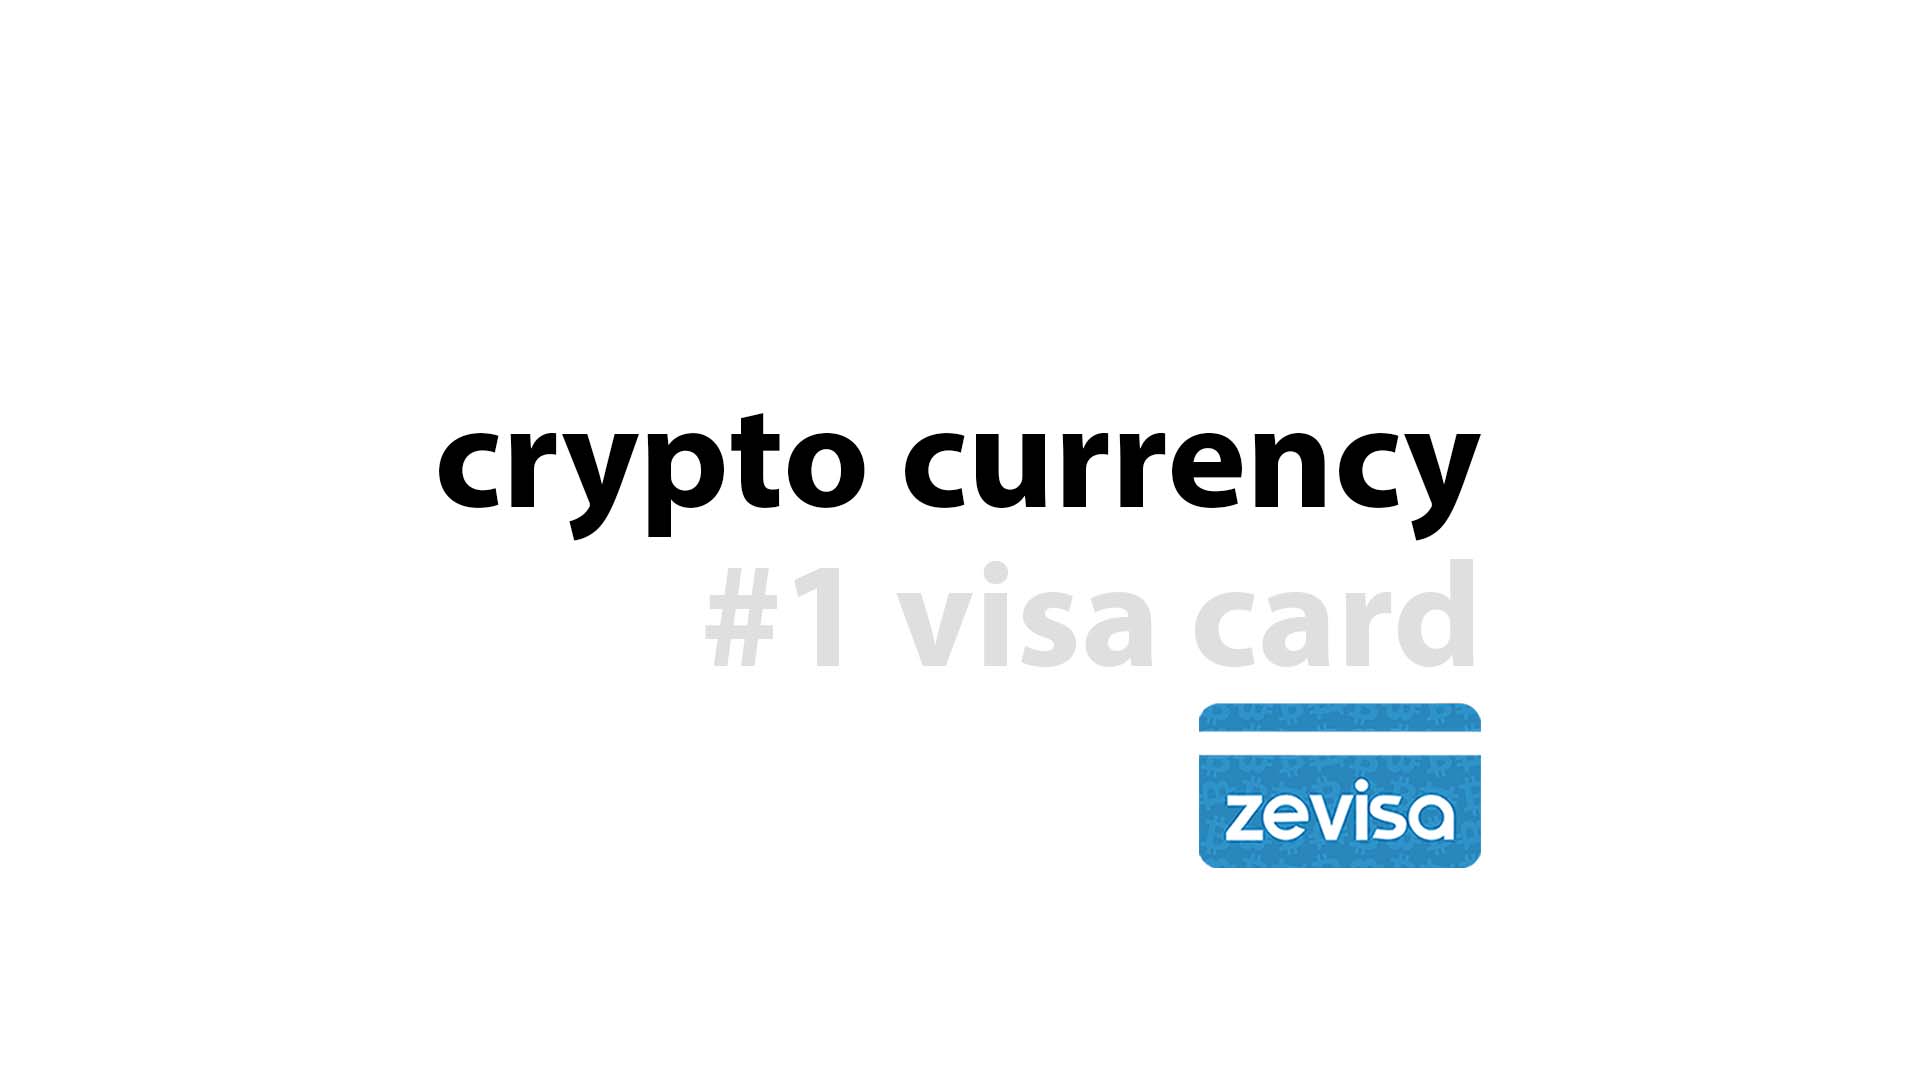 Visa Gift Card - Value: $5 - Purchase by Bitcoin or Altcoins